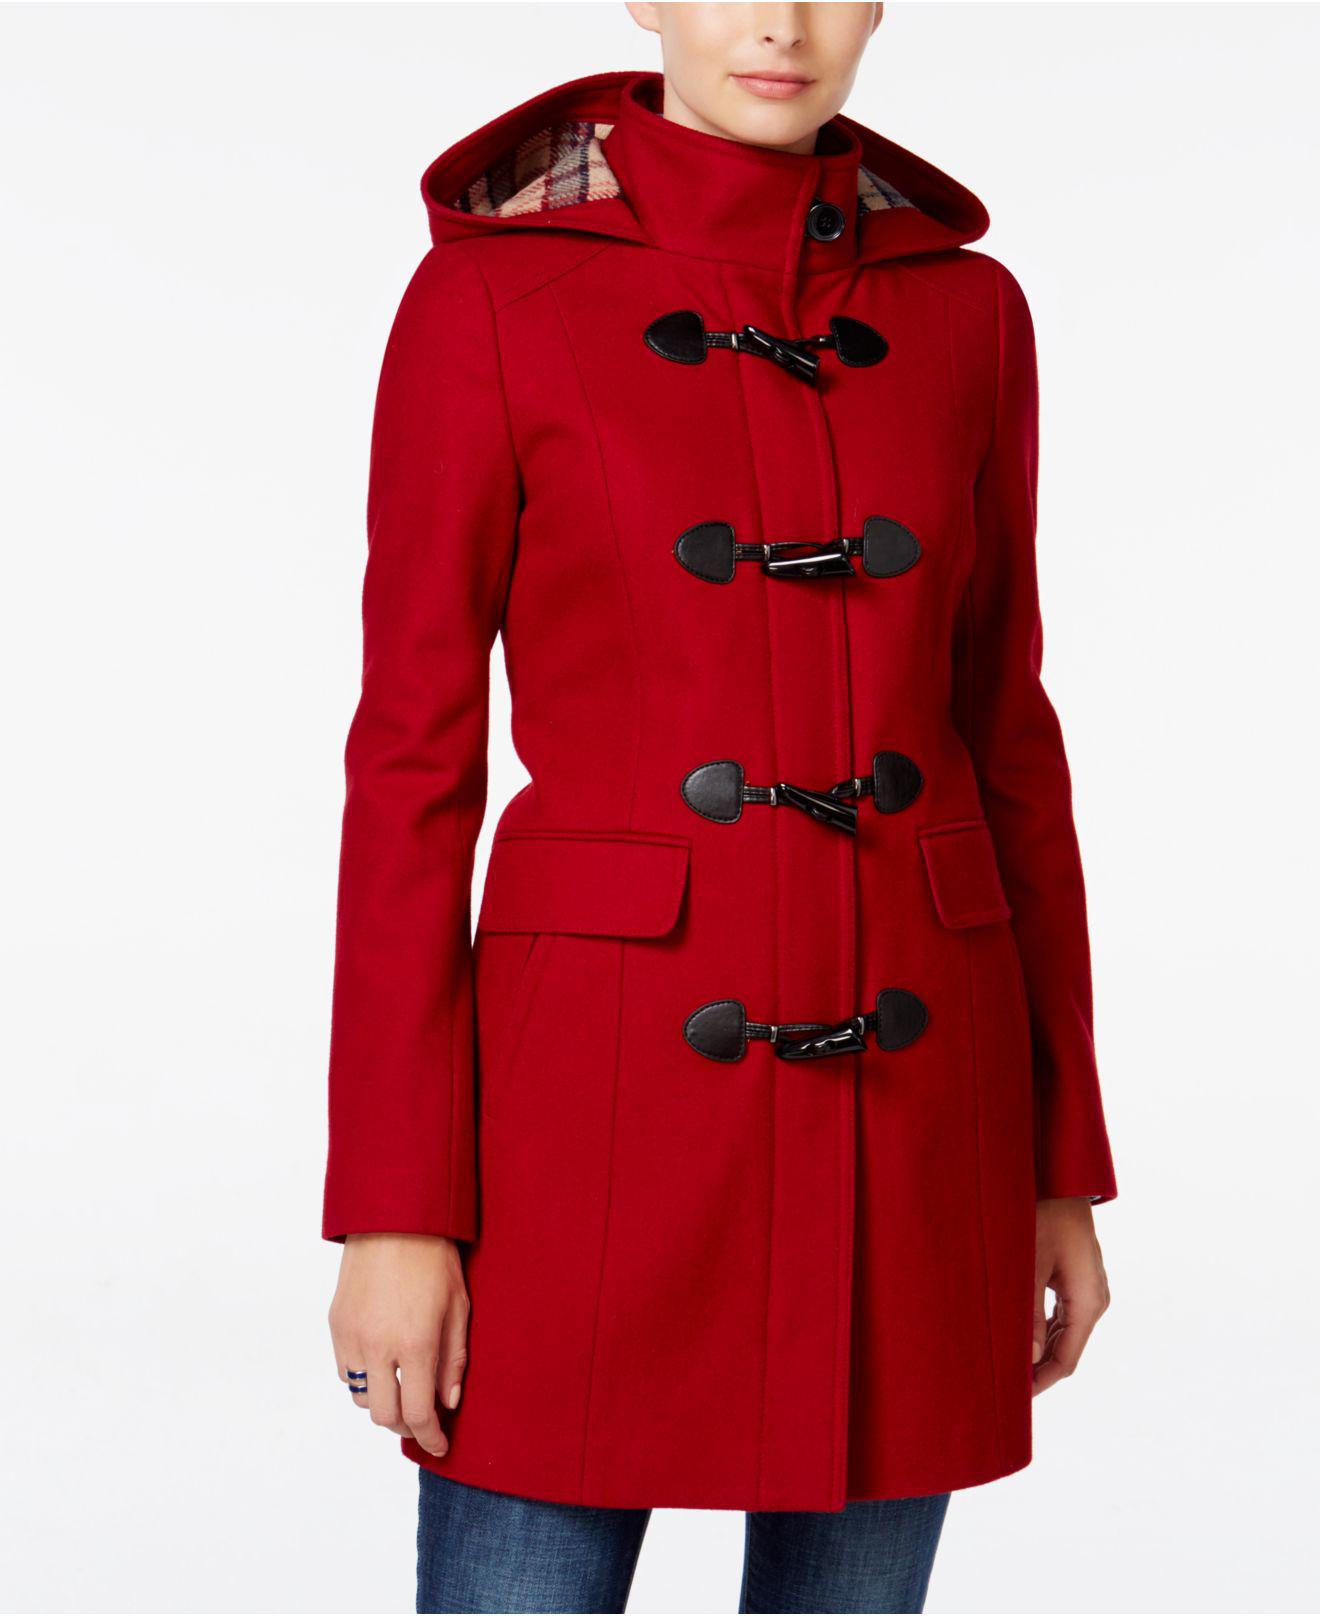 Lyst - Tommy Hilfiger Plaid-lined-hood Walker Coat in Red